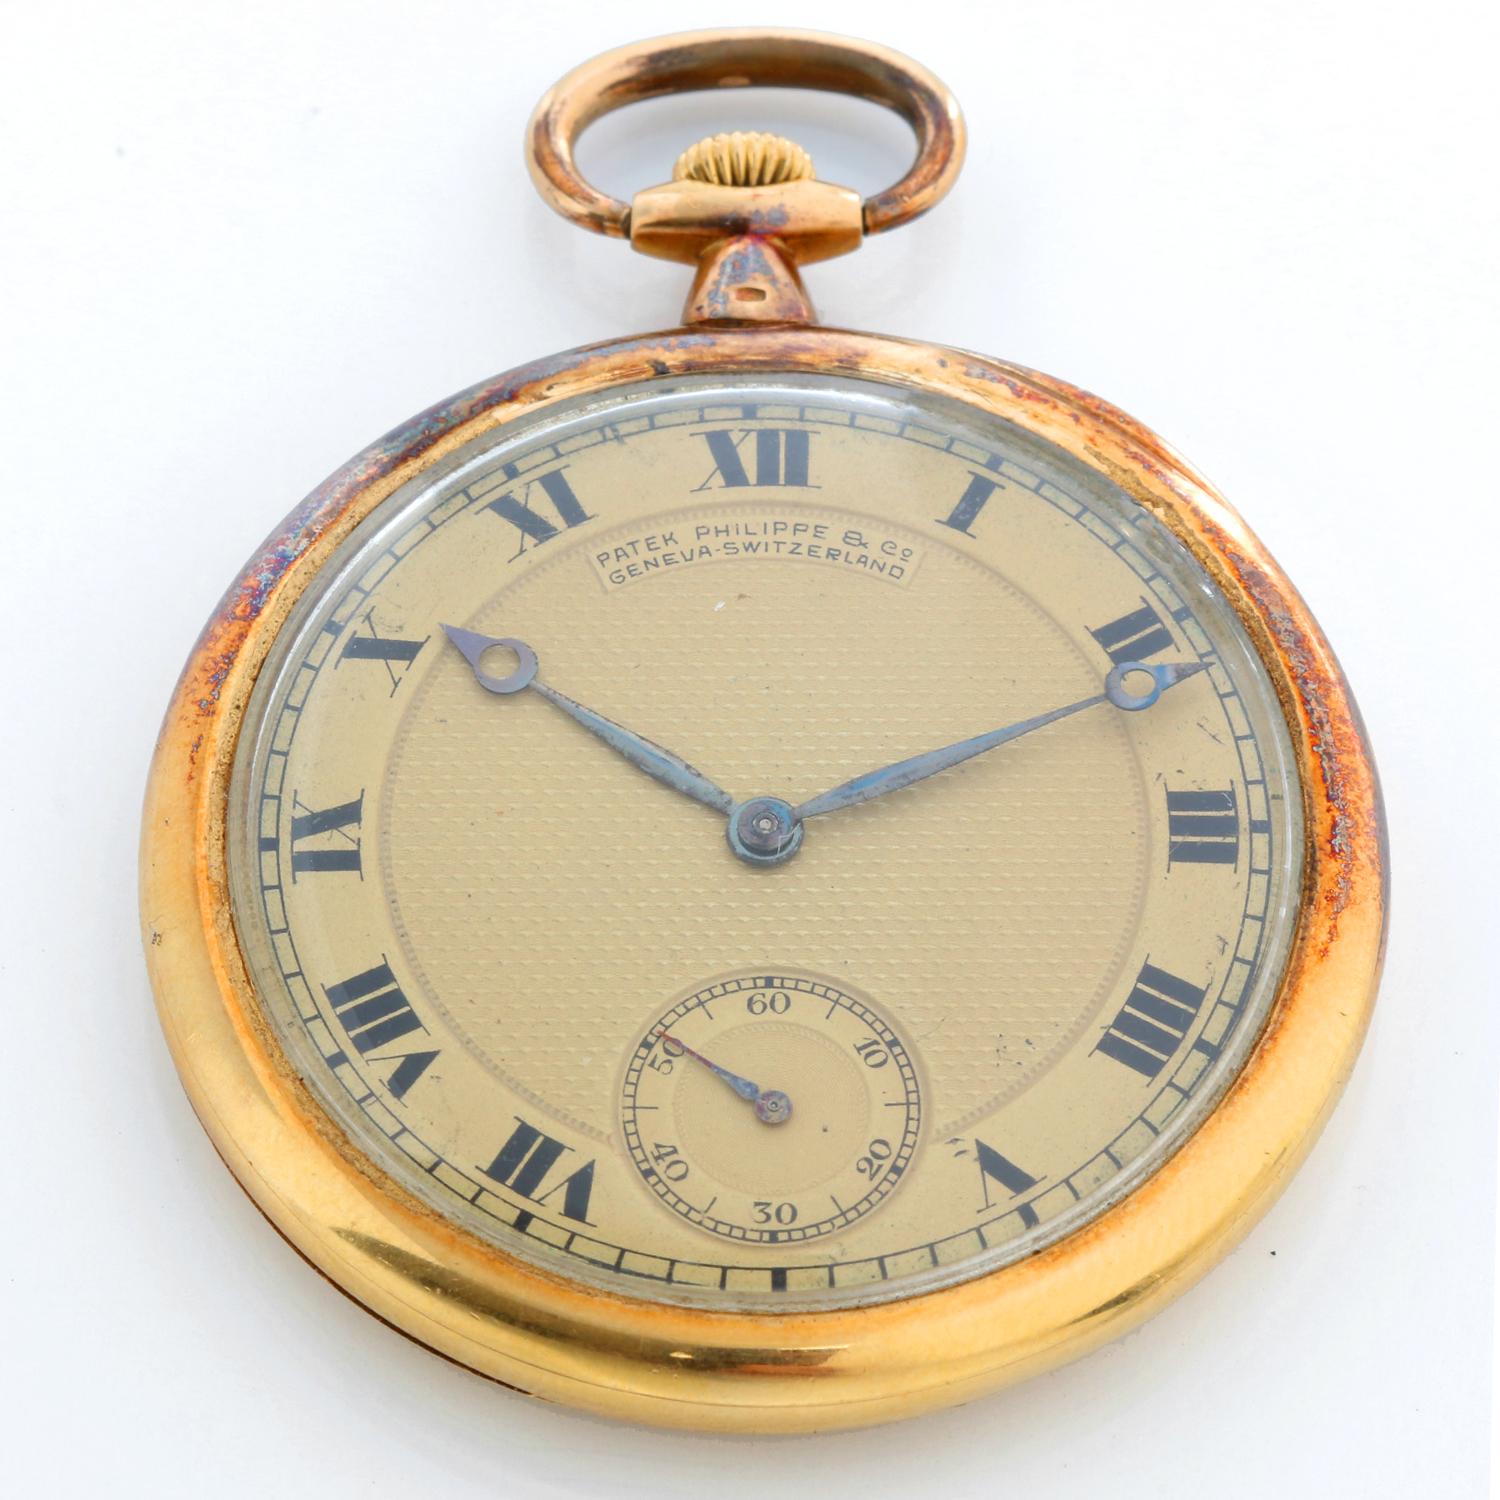 Patek Philippe 18K Yellow Gold Open Face Pocket Watch - Manual winding; 18 jewels . 18K Yellow gold (44 mm) . Gold dial with black roman numerals . Pre-owned with custom box .